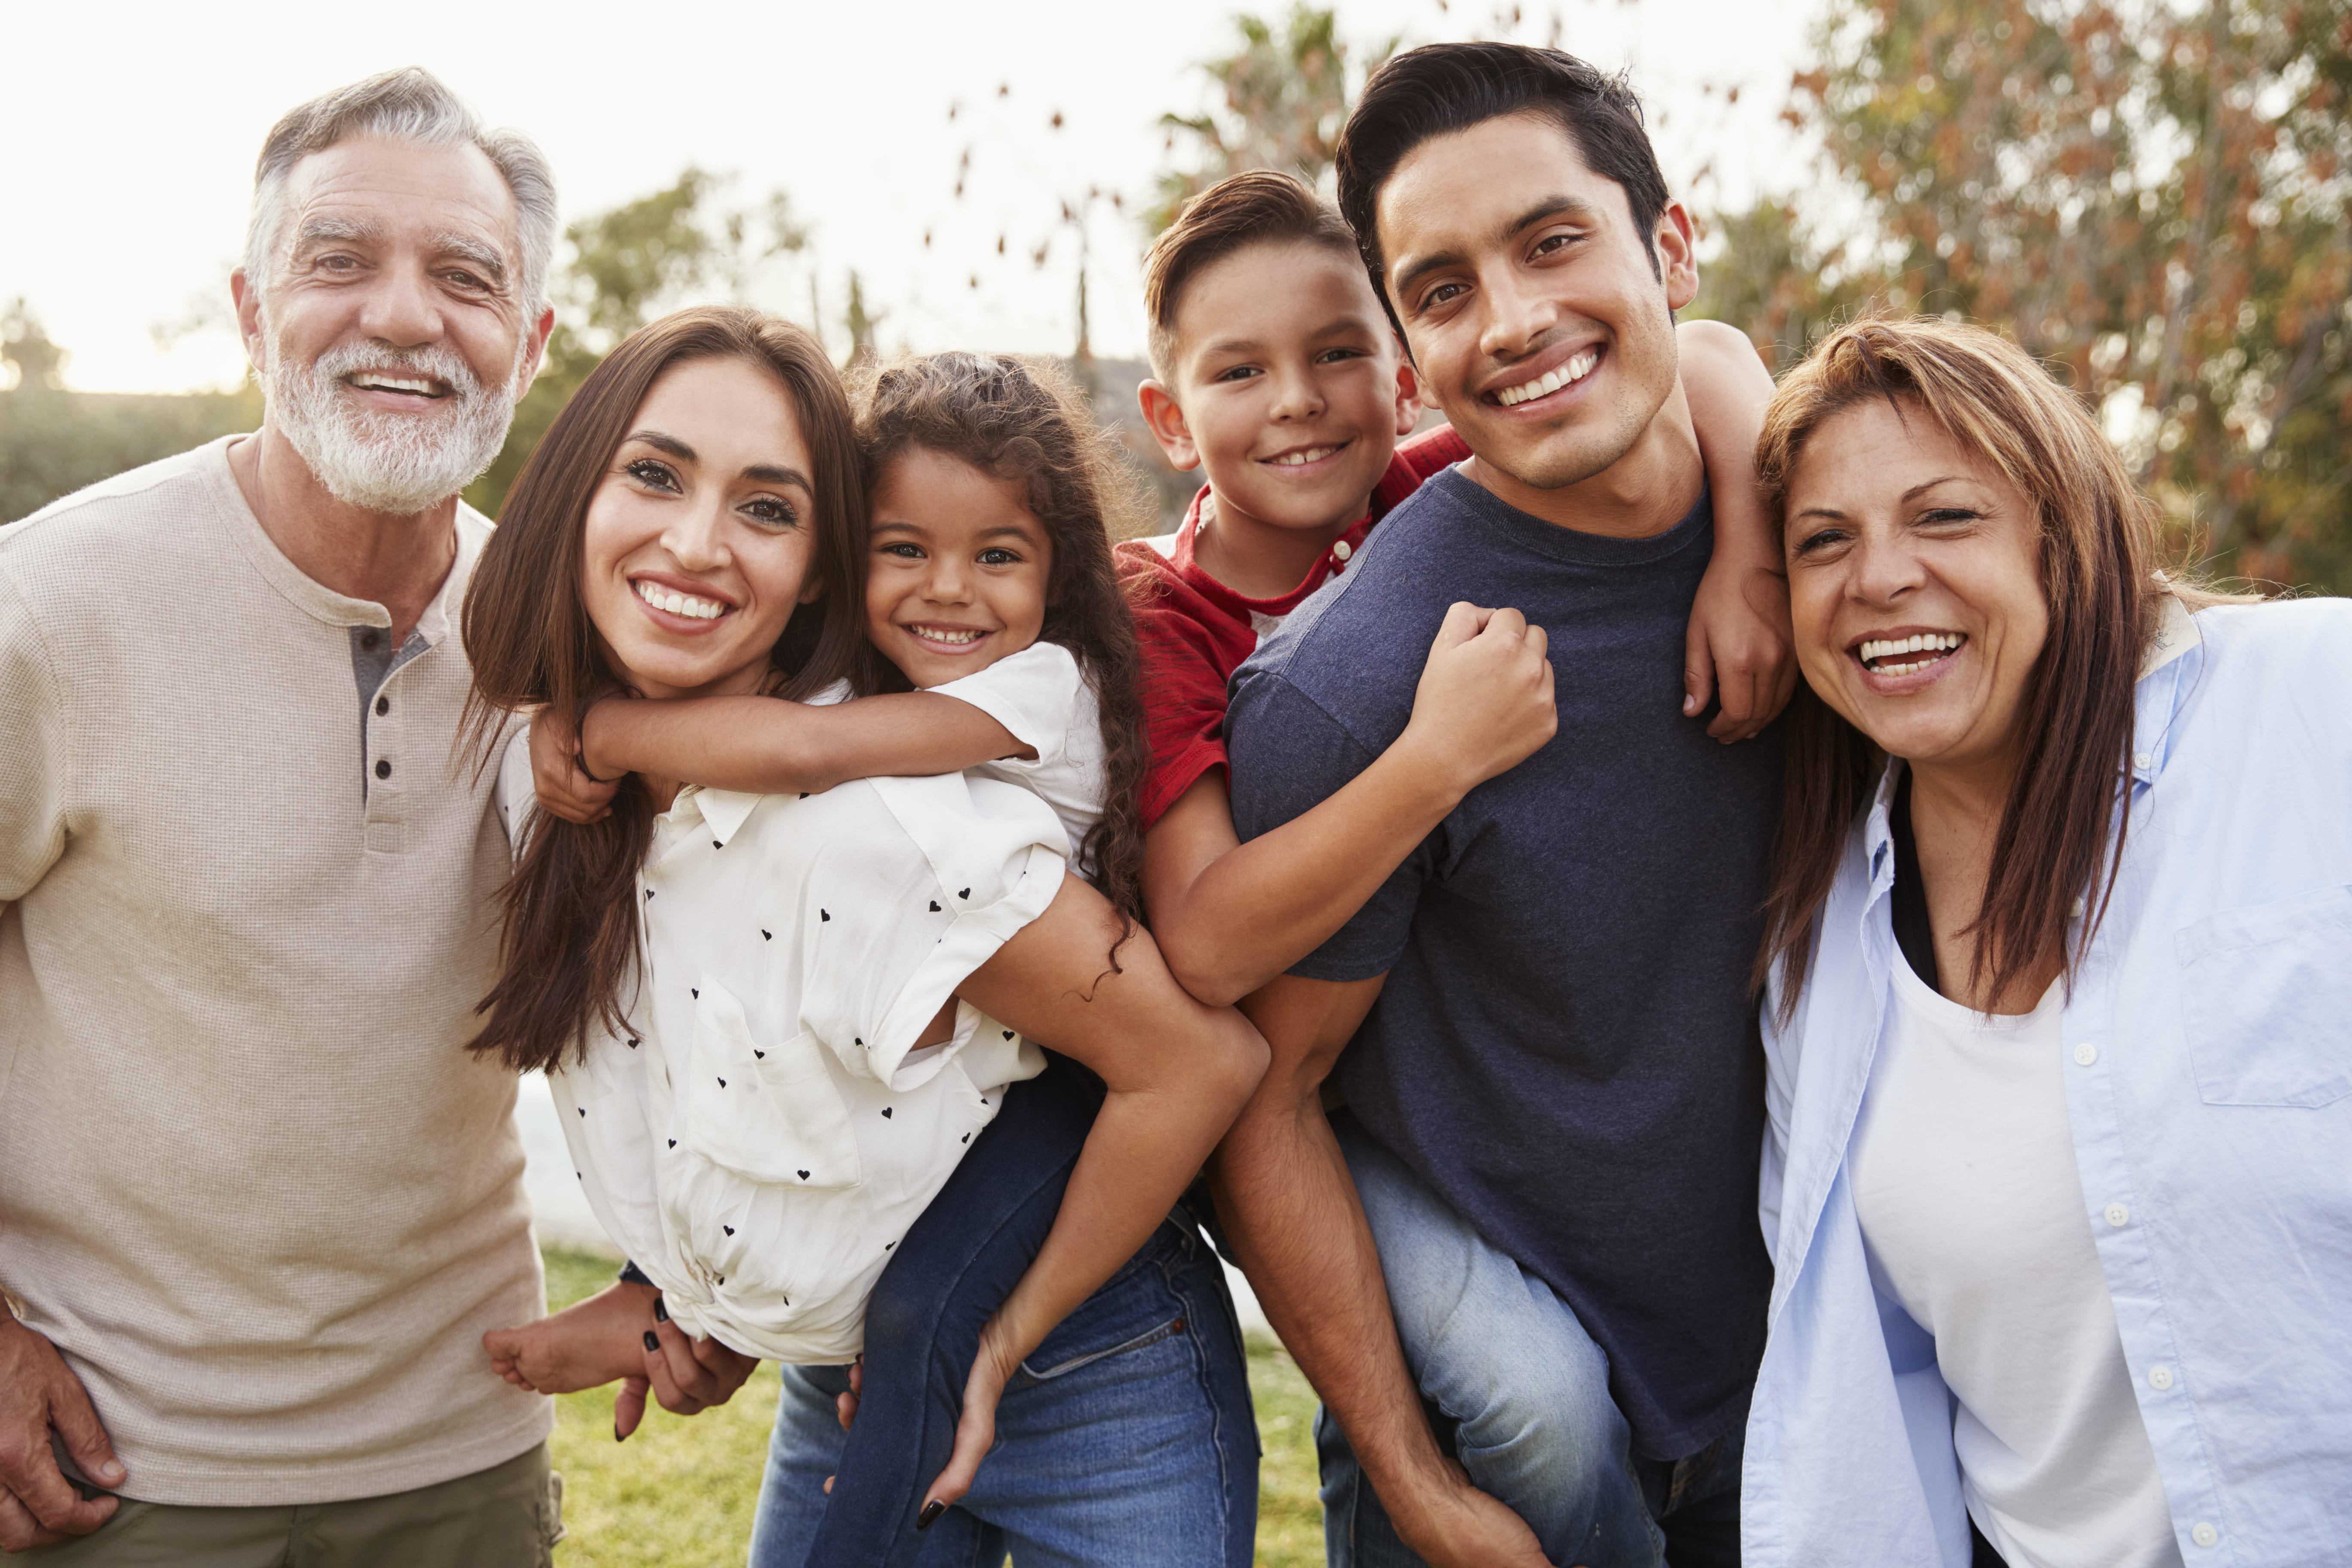 Group of diverse family smiling together outside